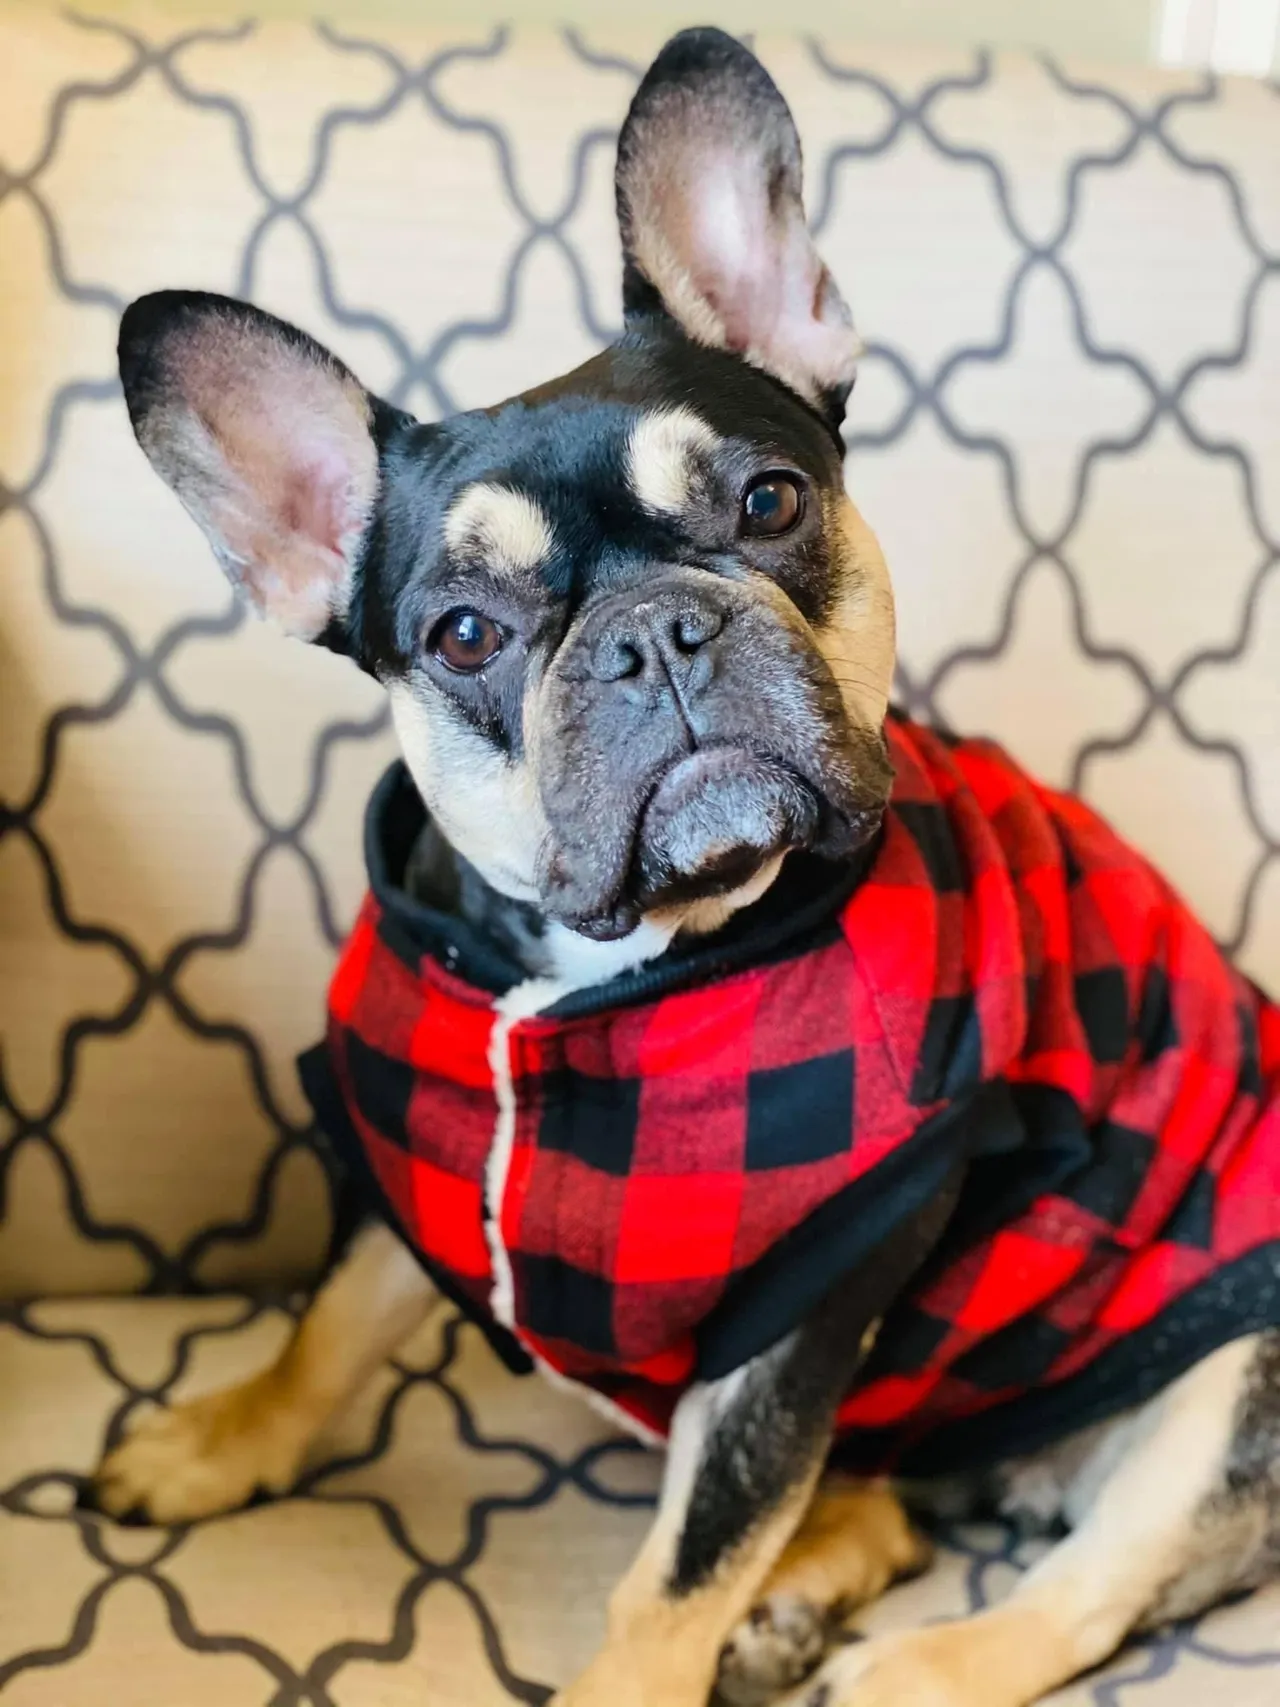 A dog wearing a red and black plaid shirt.